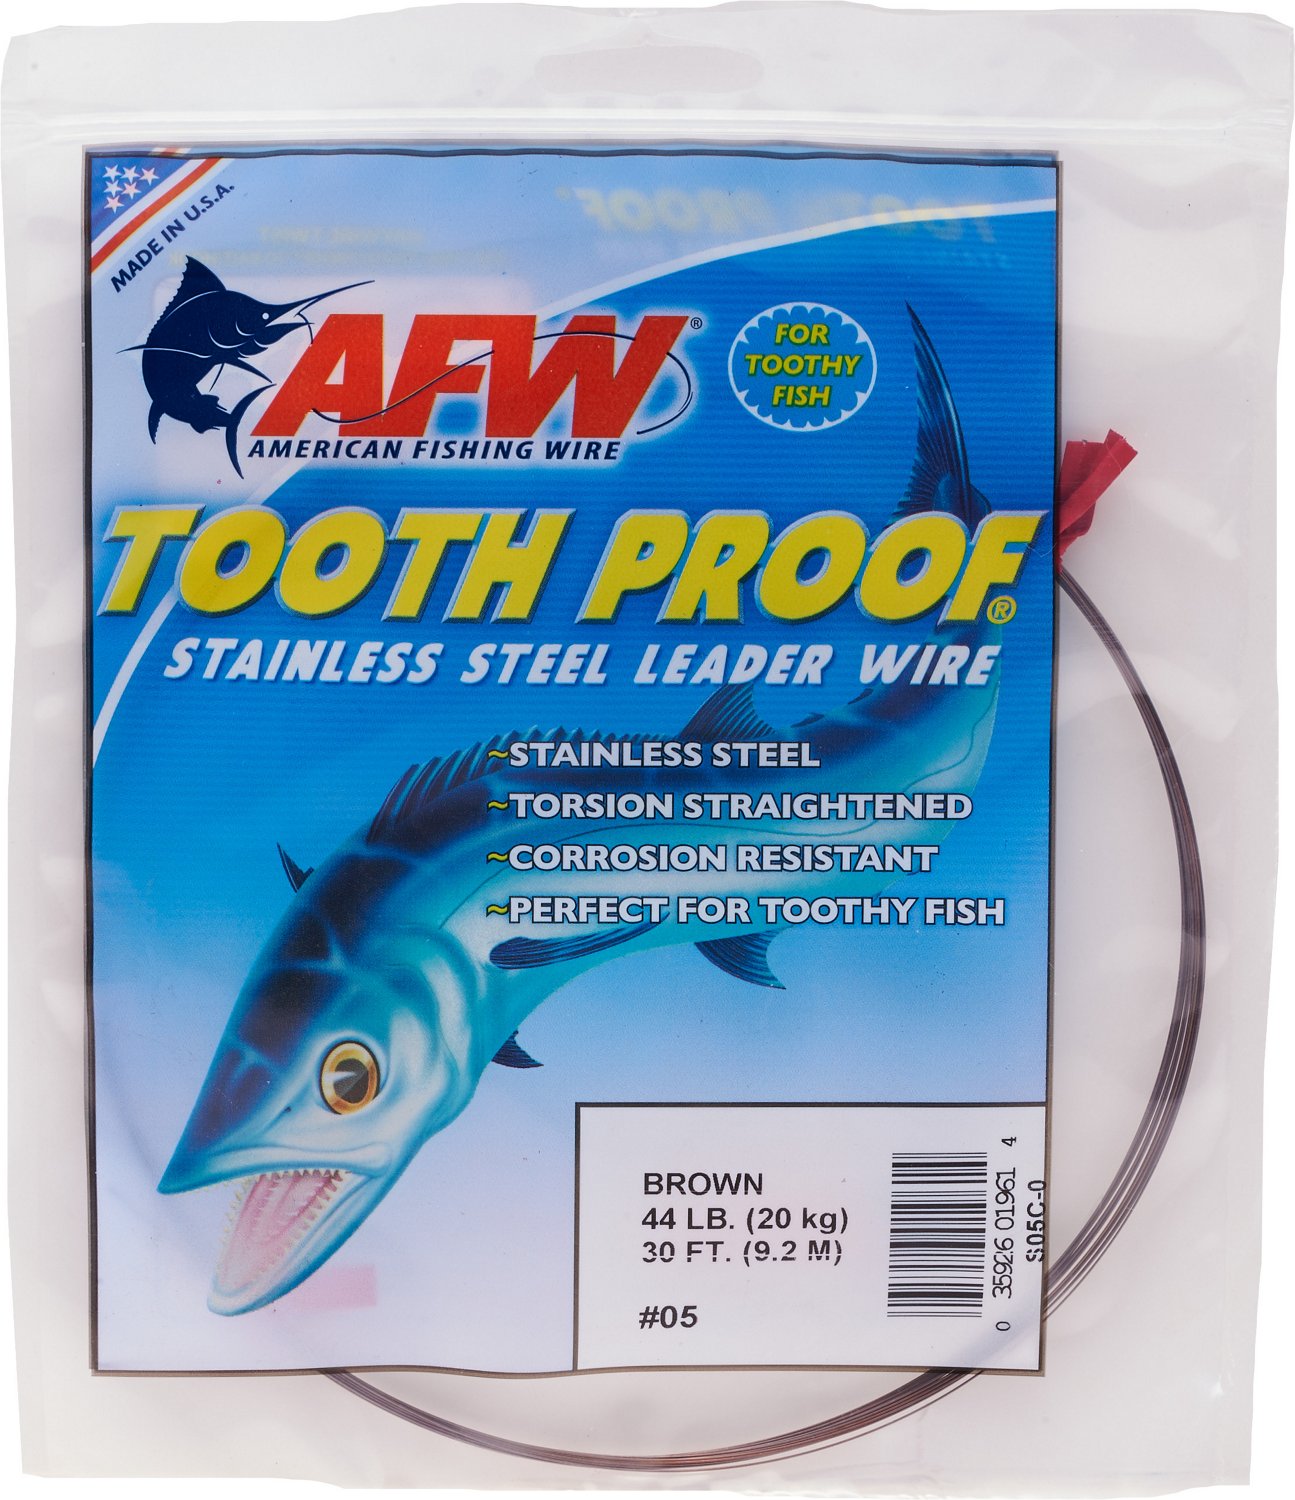 American Fishing Wire Tooth Proof 44 lbs - 30 ft Single-Strand Leader Wire